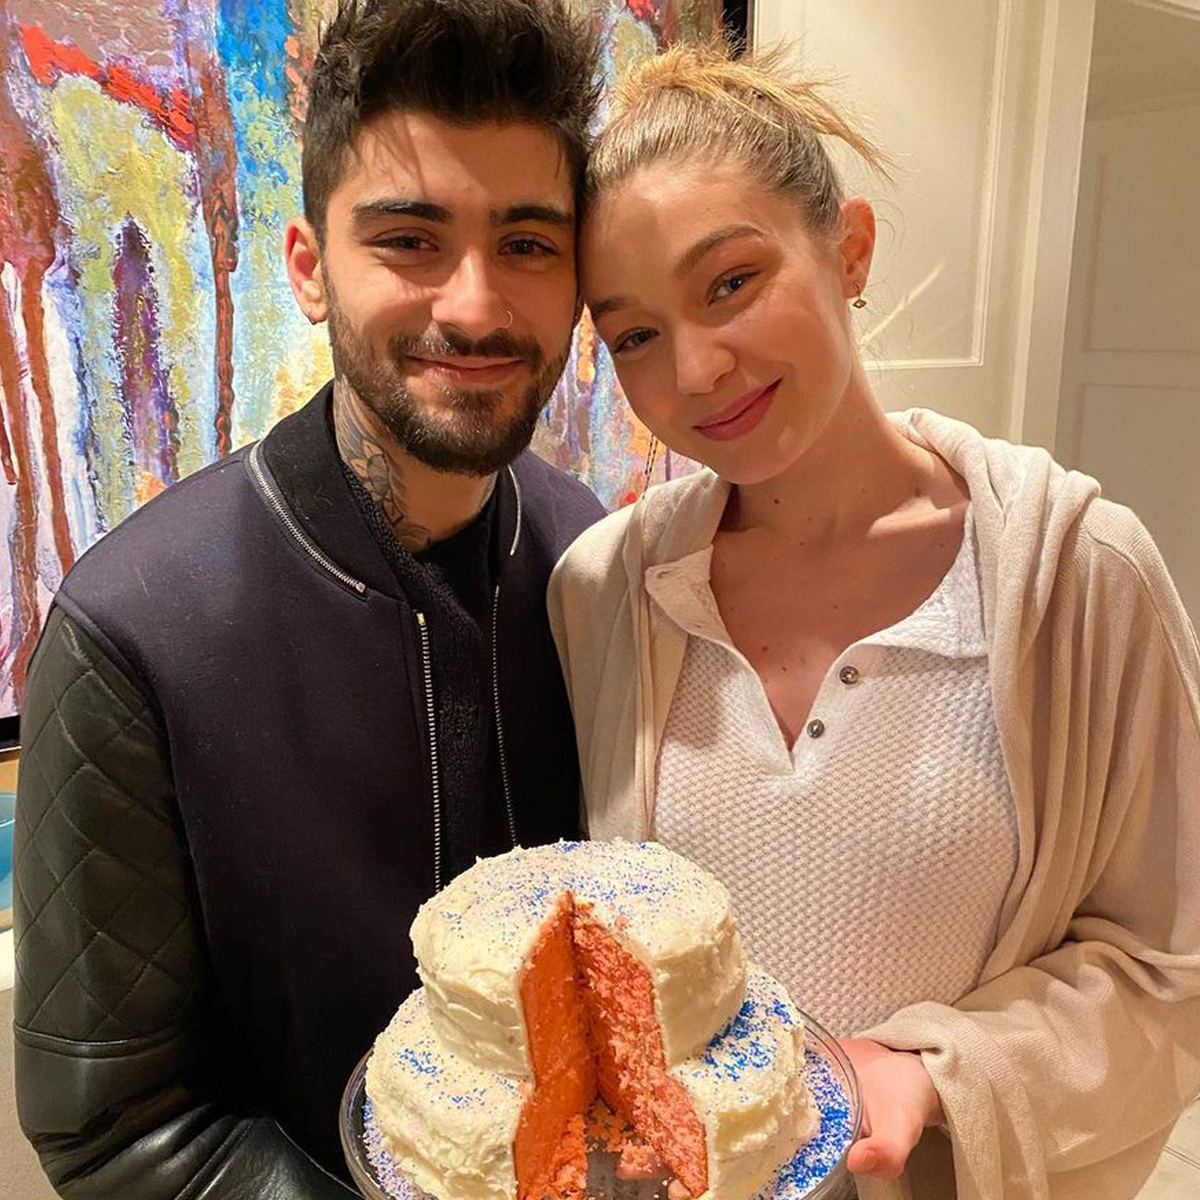 Gigi Hadid Shares Photo of Intimate Moment With Daughter Khai